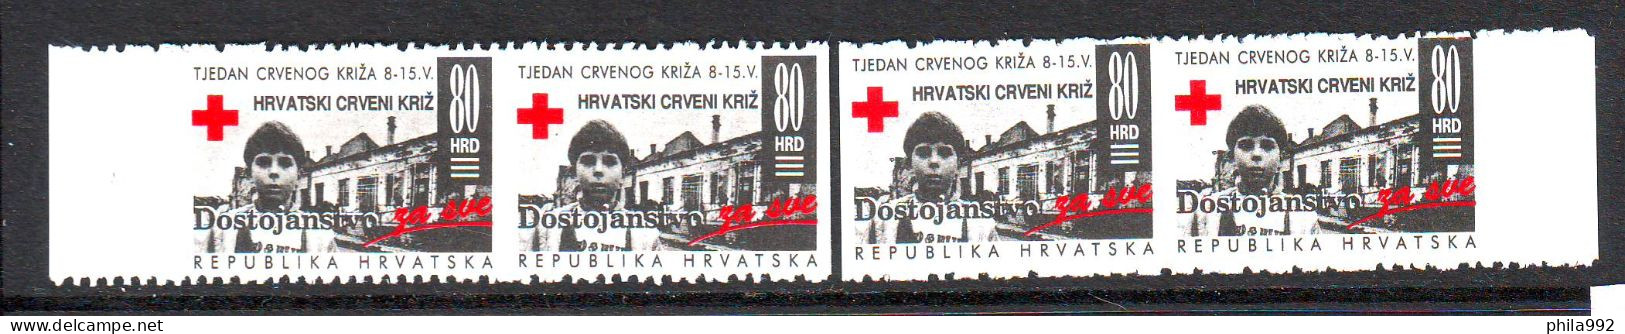 Croatia 1993 Charity Stamp Mi.No. 26 RED CROSS  Two Pairs Without Vertical Serrations    MNH - Croatia